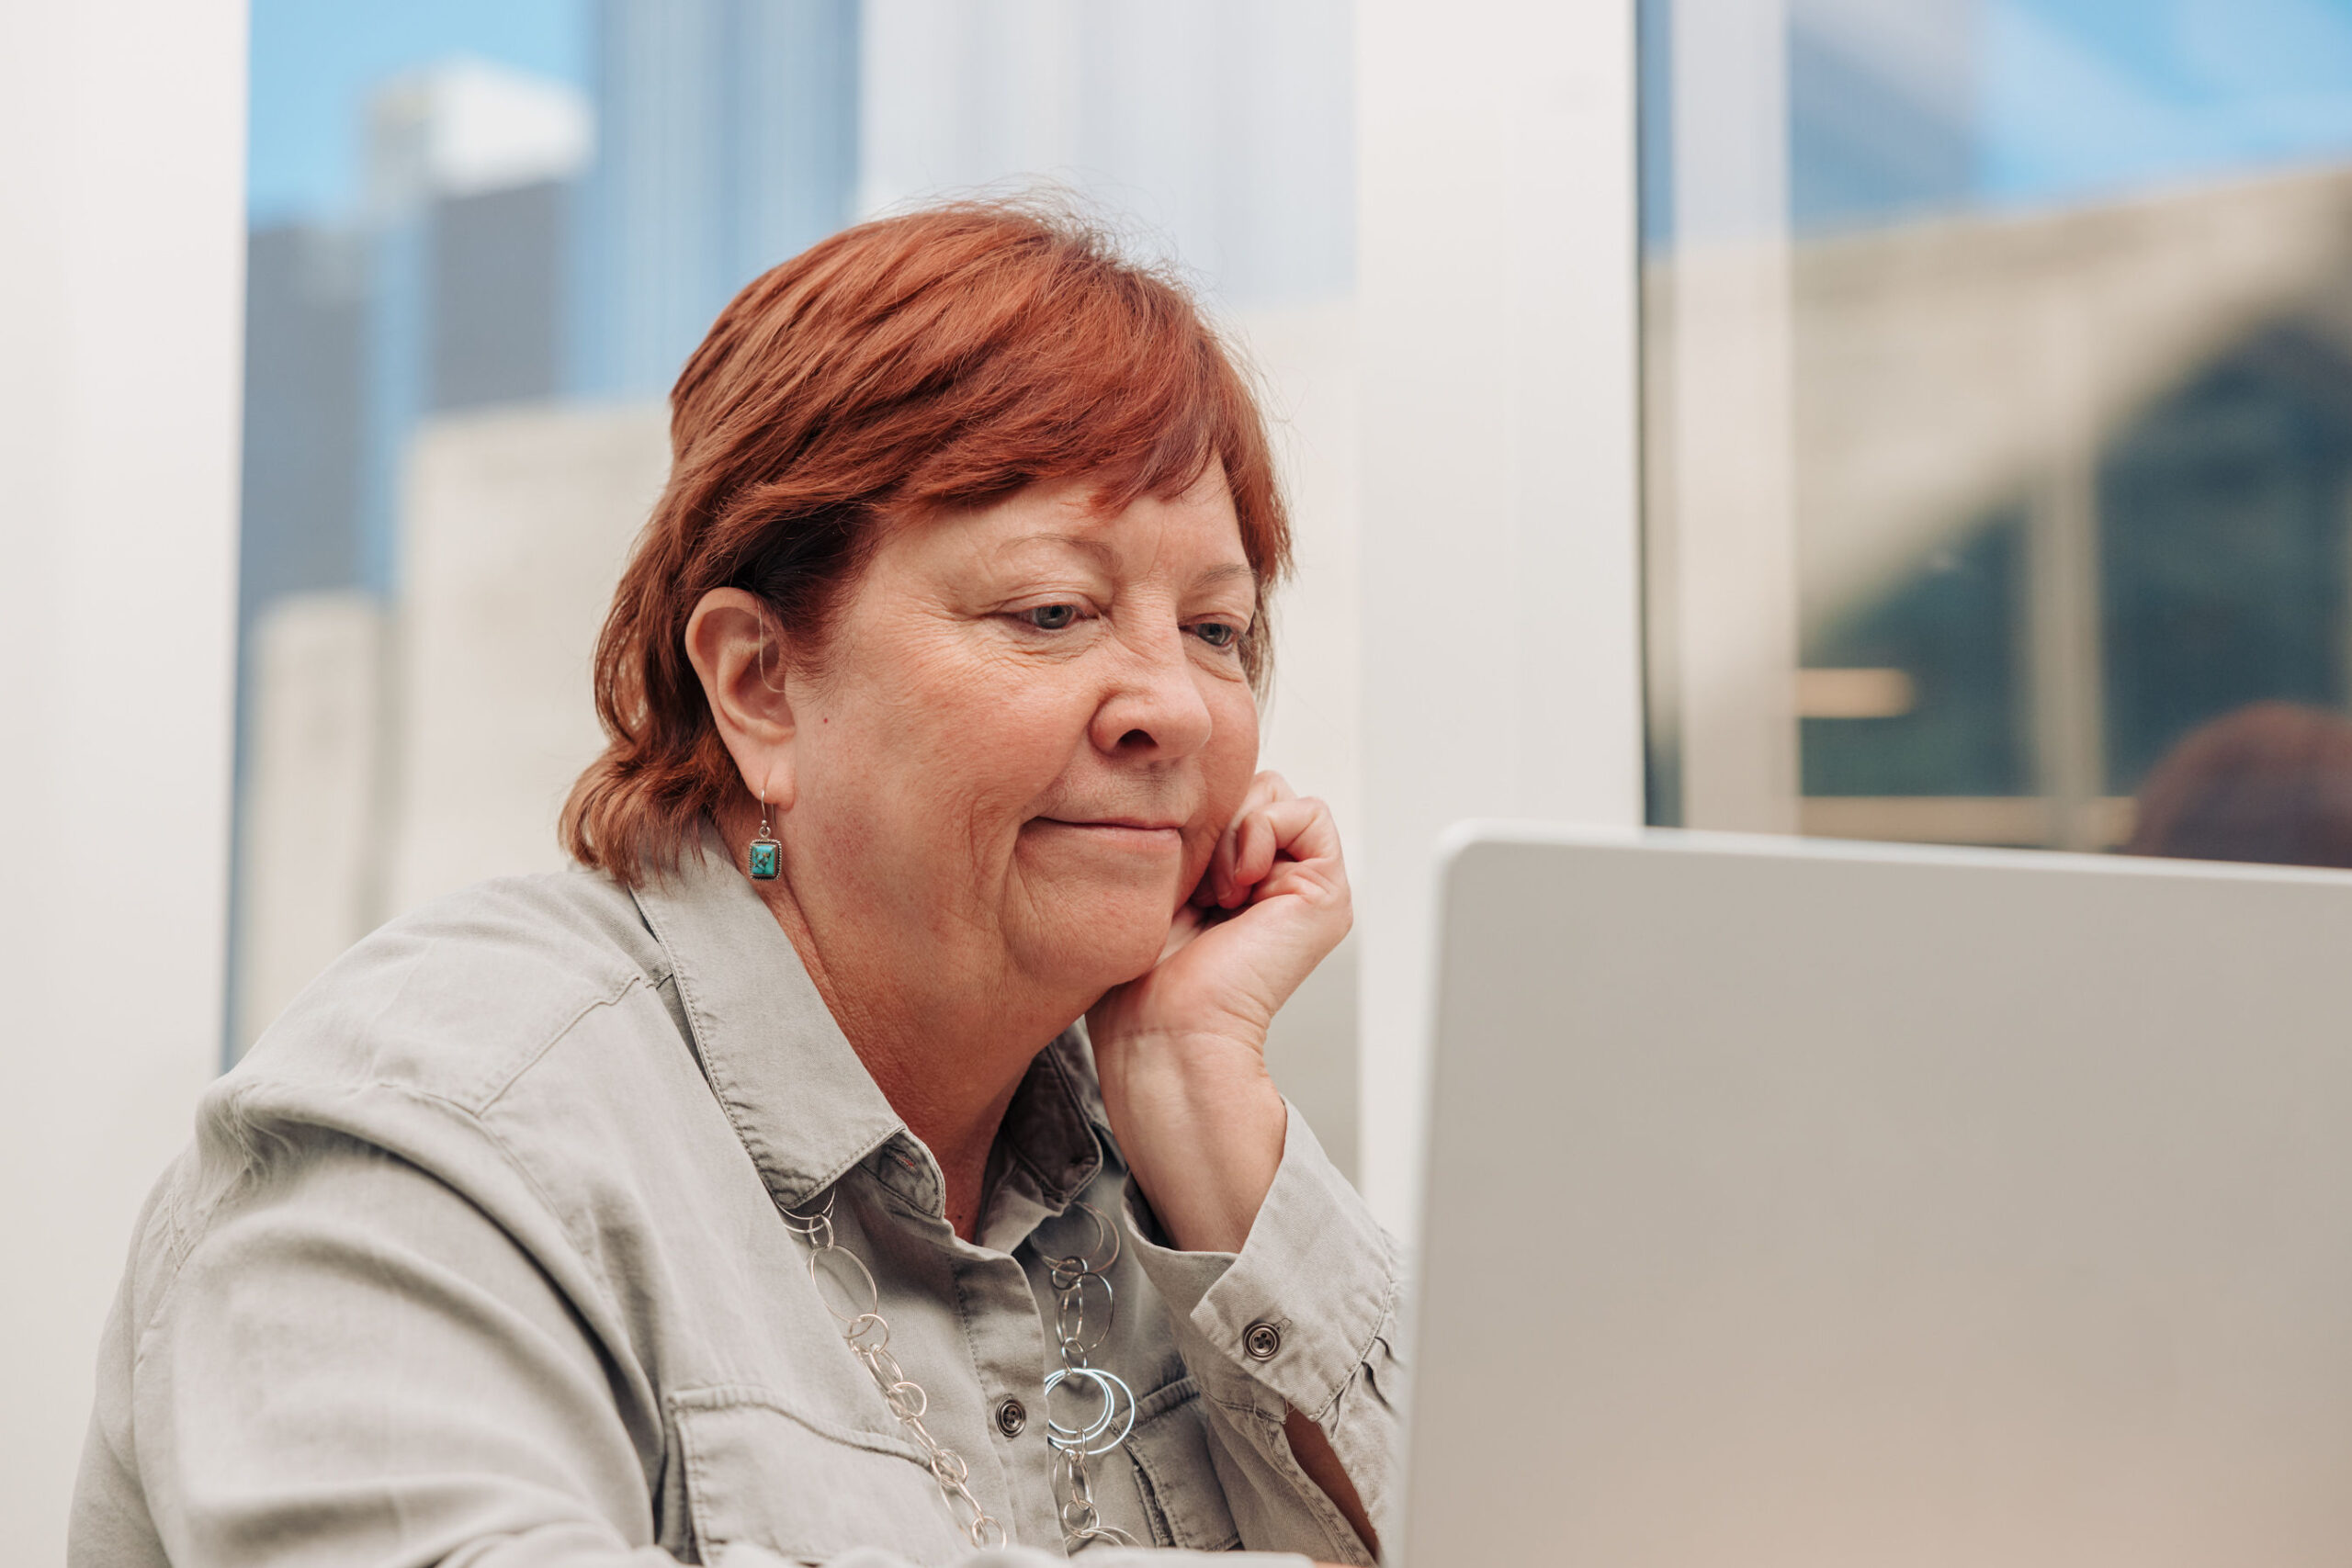 An older woman works on her laptop in an office. Her red hair is tucked behind her ear to reveal her hearing aid.